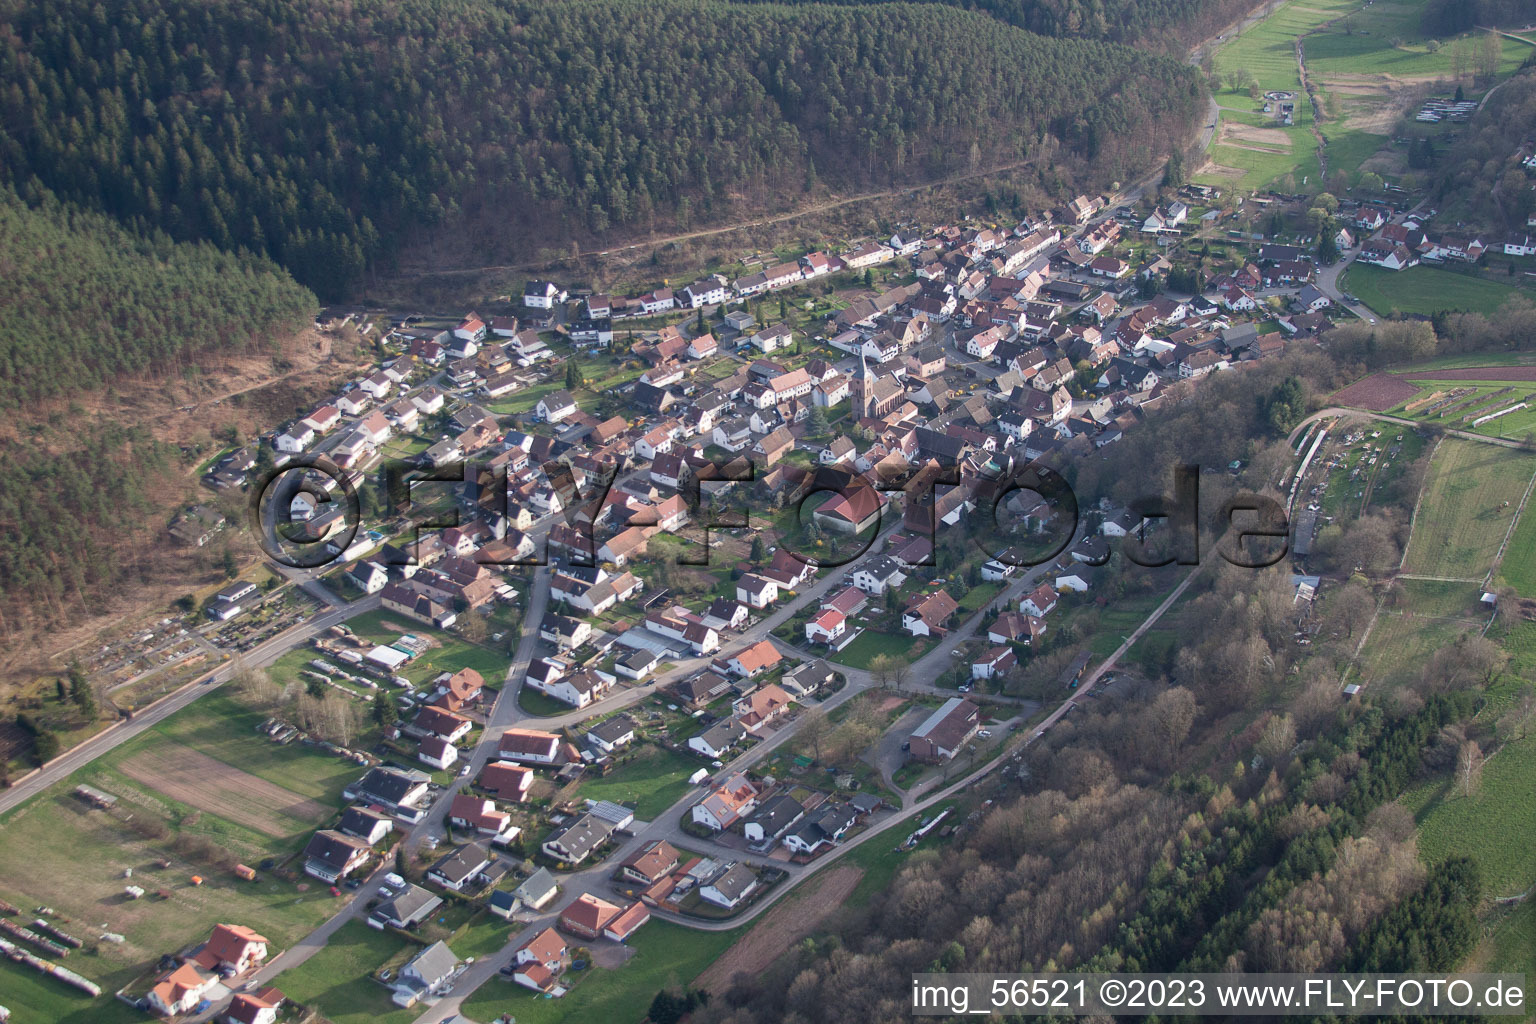 Drone recording of Vorderweidenthal in the state Rhineland-Palatinate, Germany